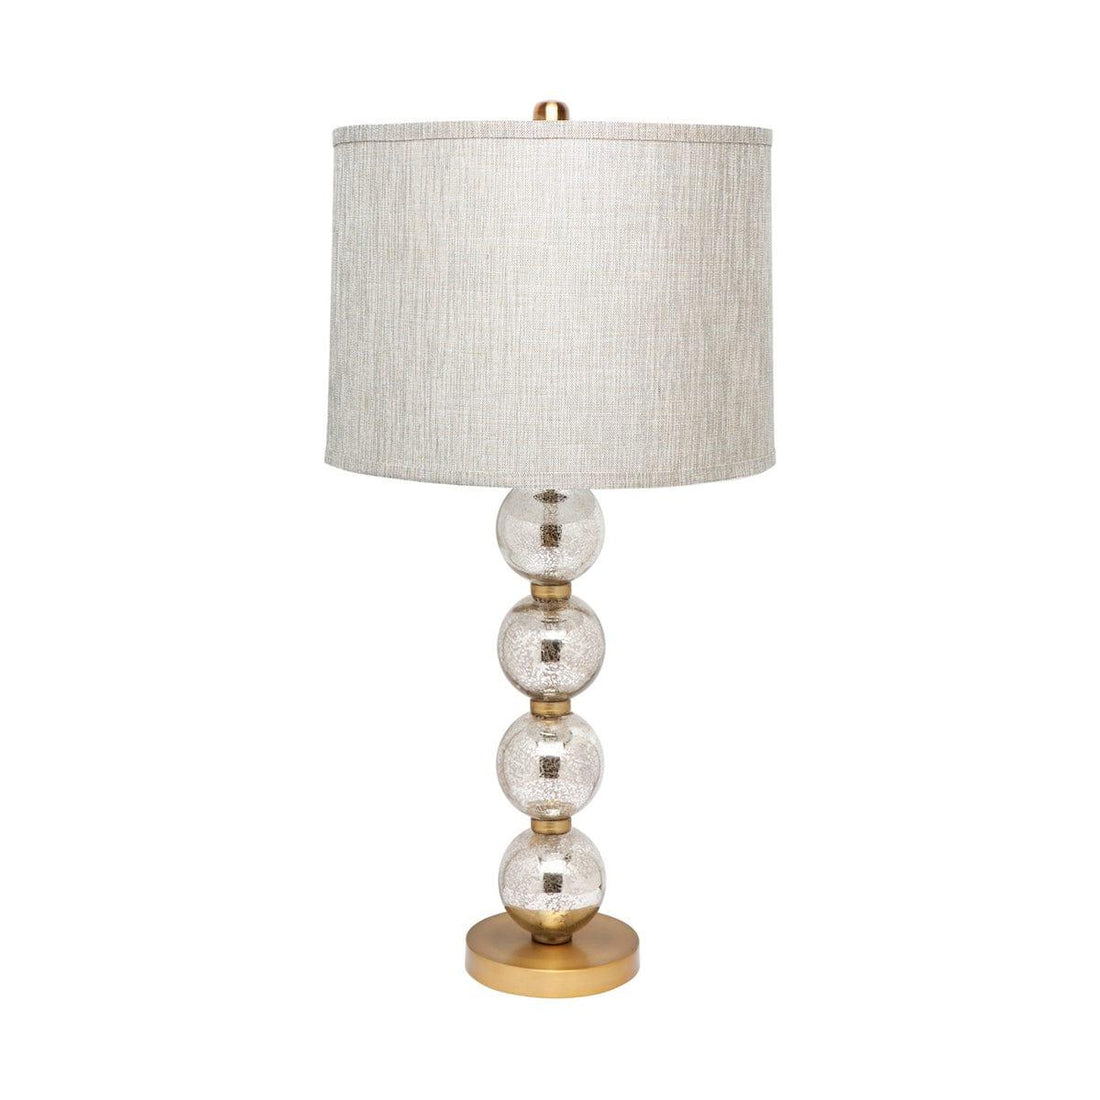 House Journey Table Lamp Evie Table Lamp